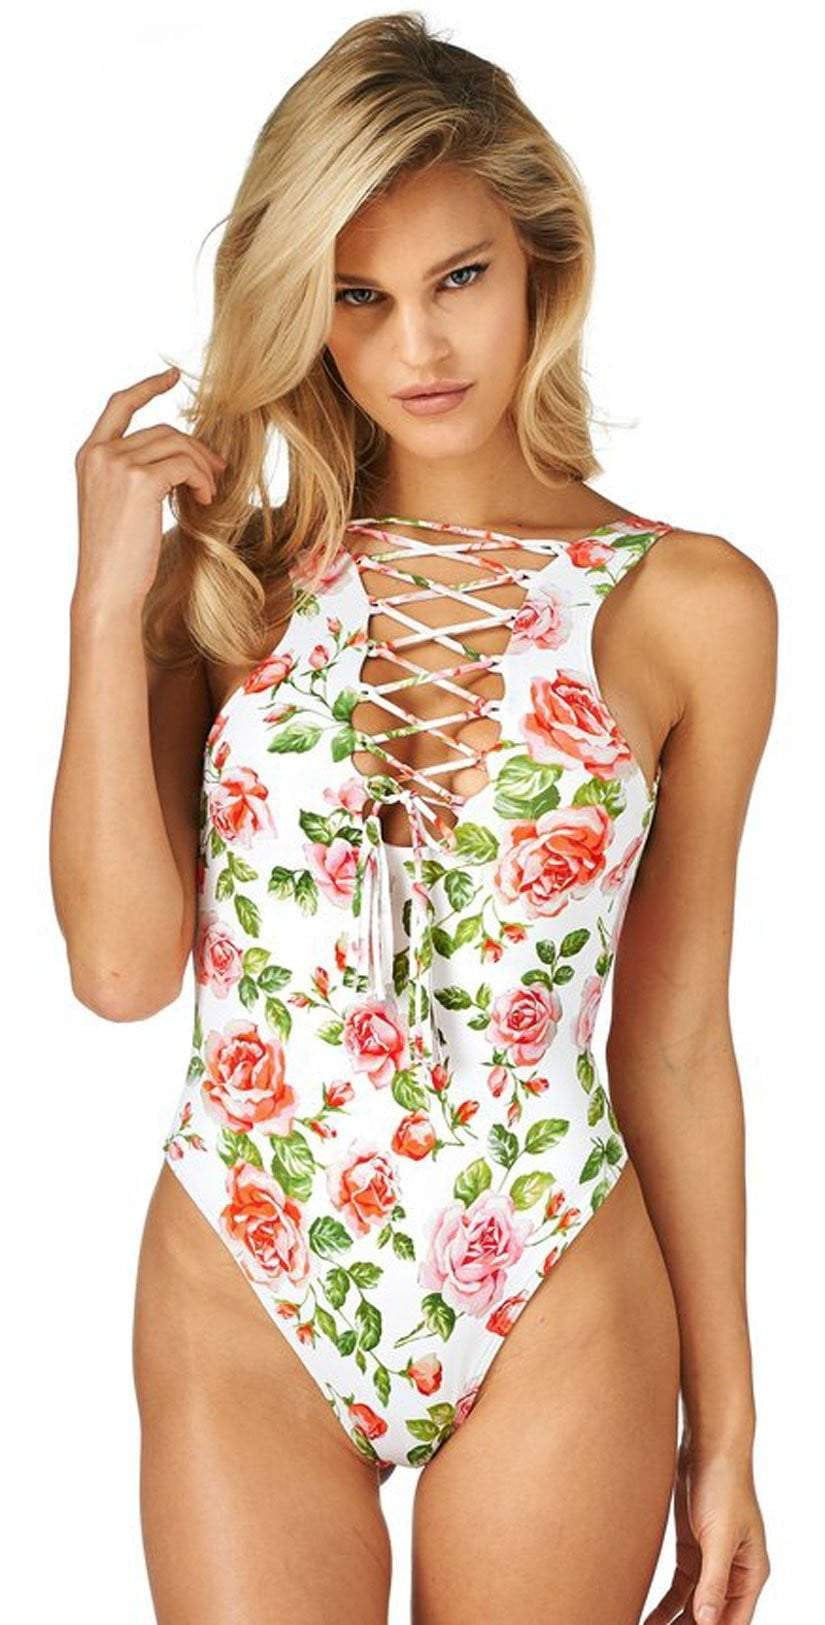 South Beach Swimsuits Montce Cage Bralette Top in Red Floral – South Beach  Swimsuits